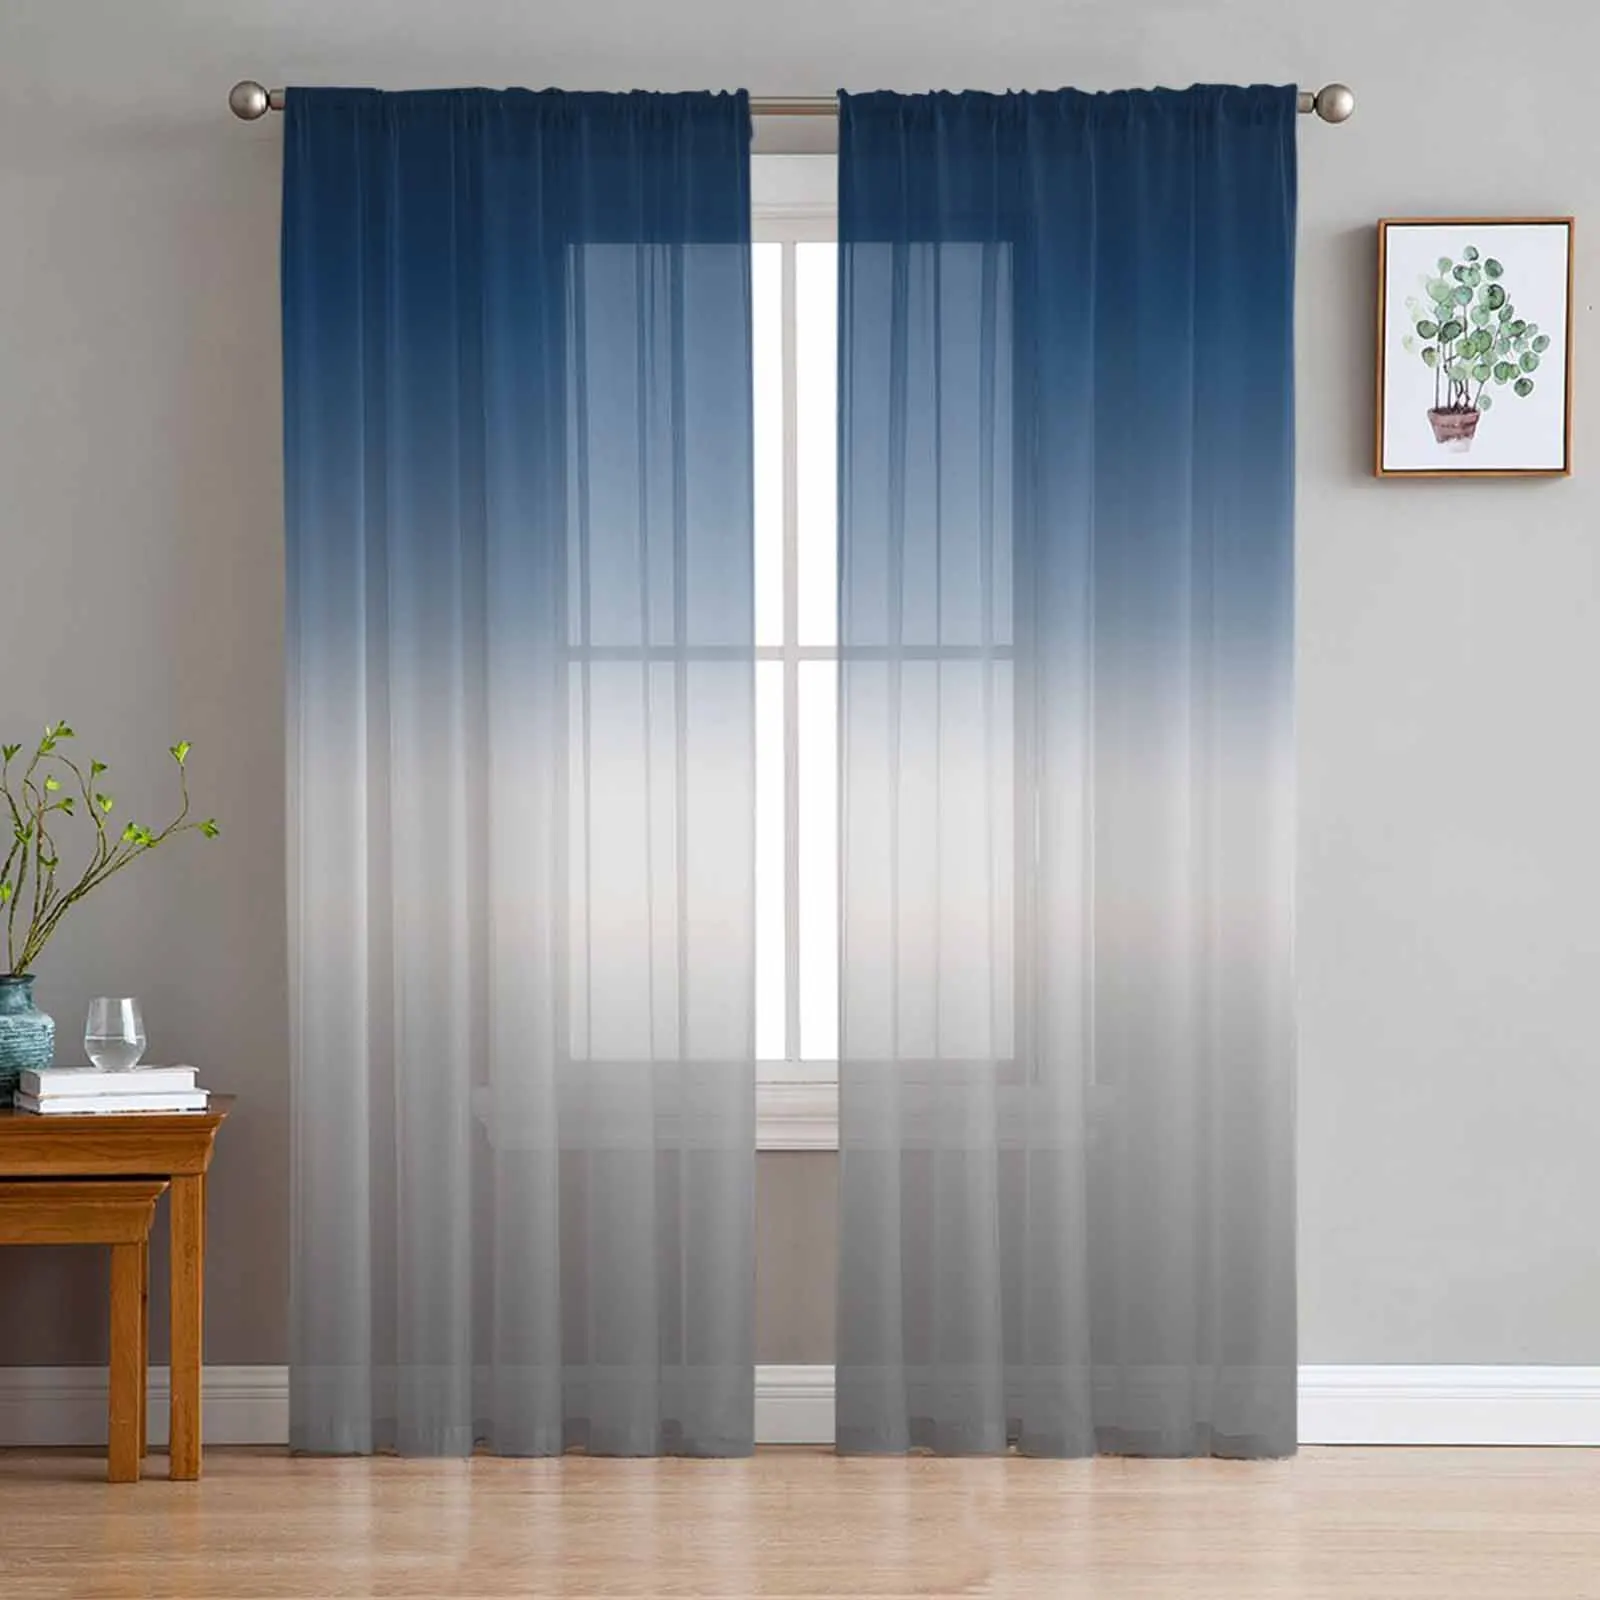 

Blue Gray Gradient Abstract Chiffon Sheer Curtains for Living Room Bedroom Home Decoration Window Voile Tulle Curtain Drapes